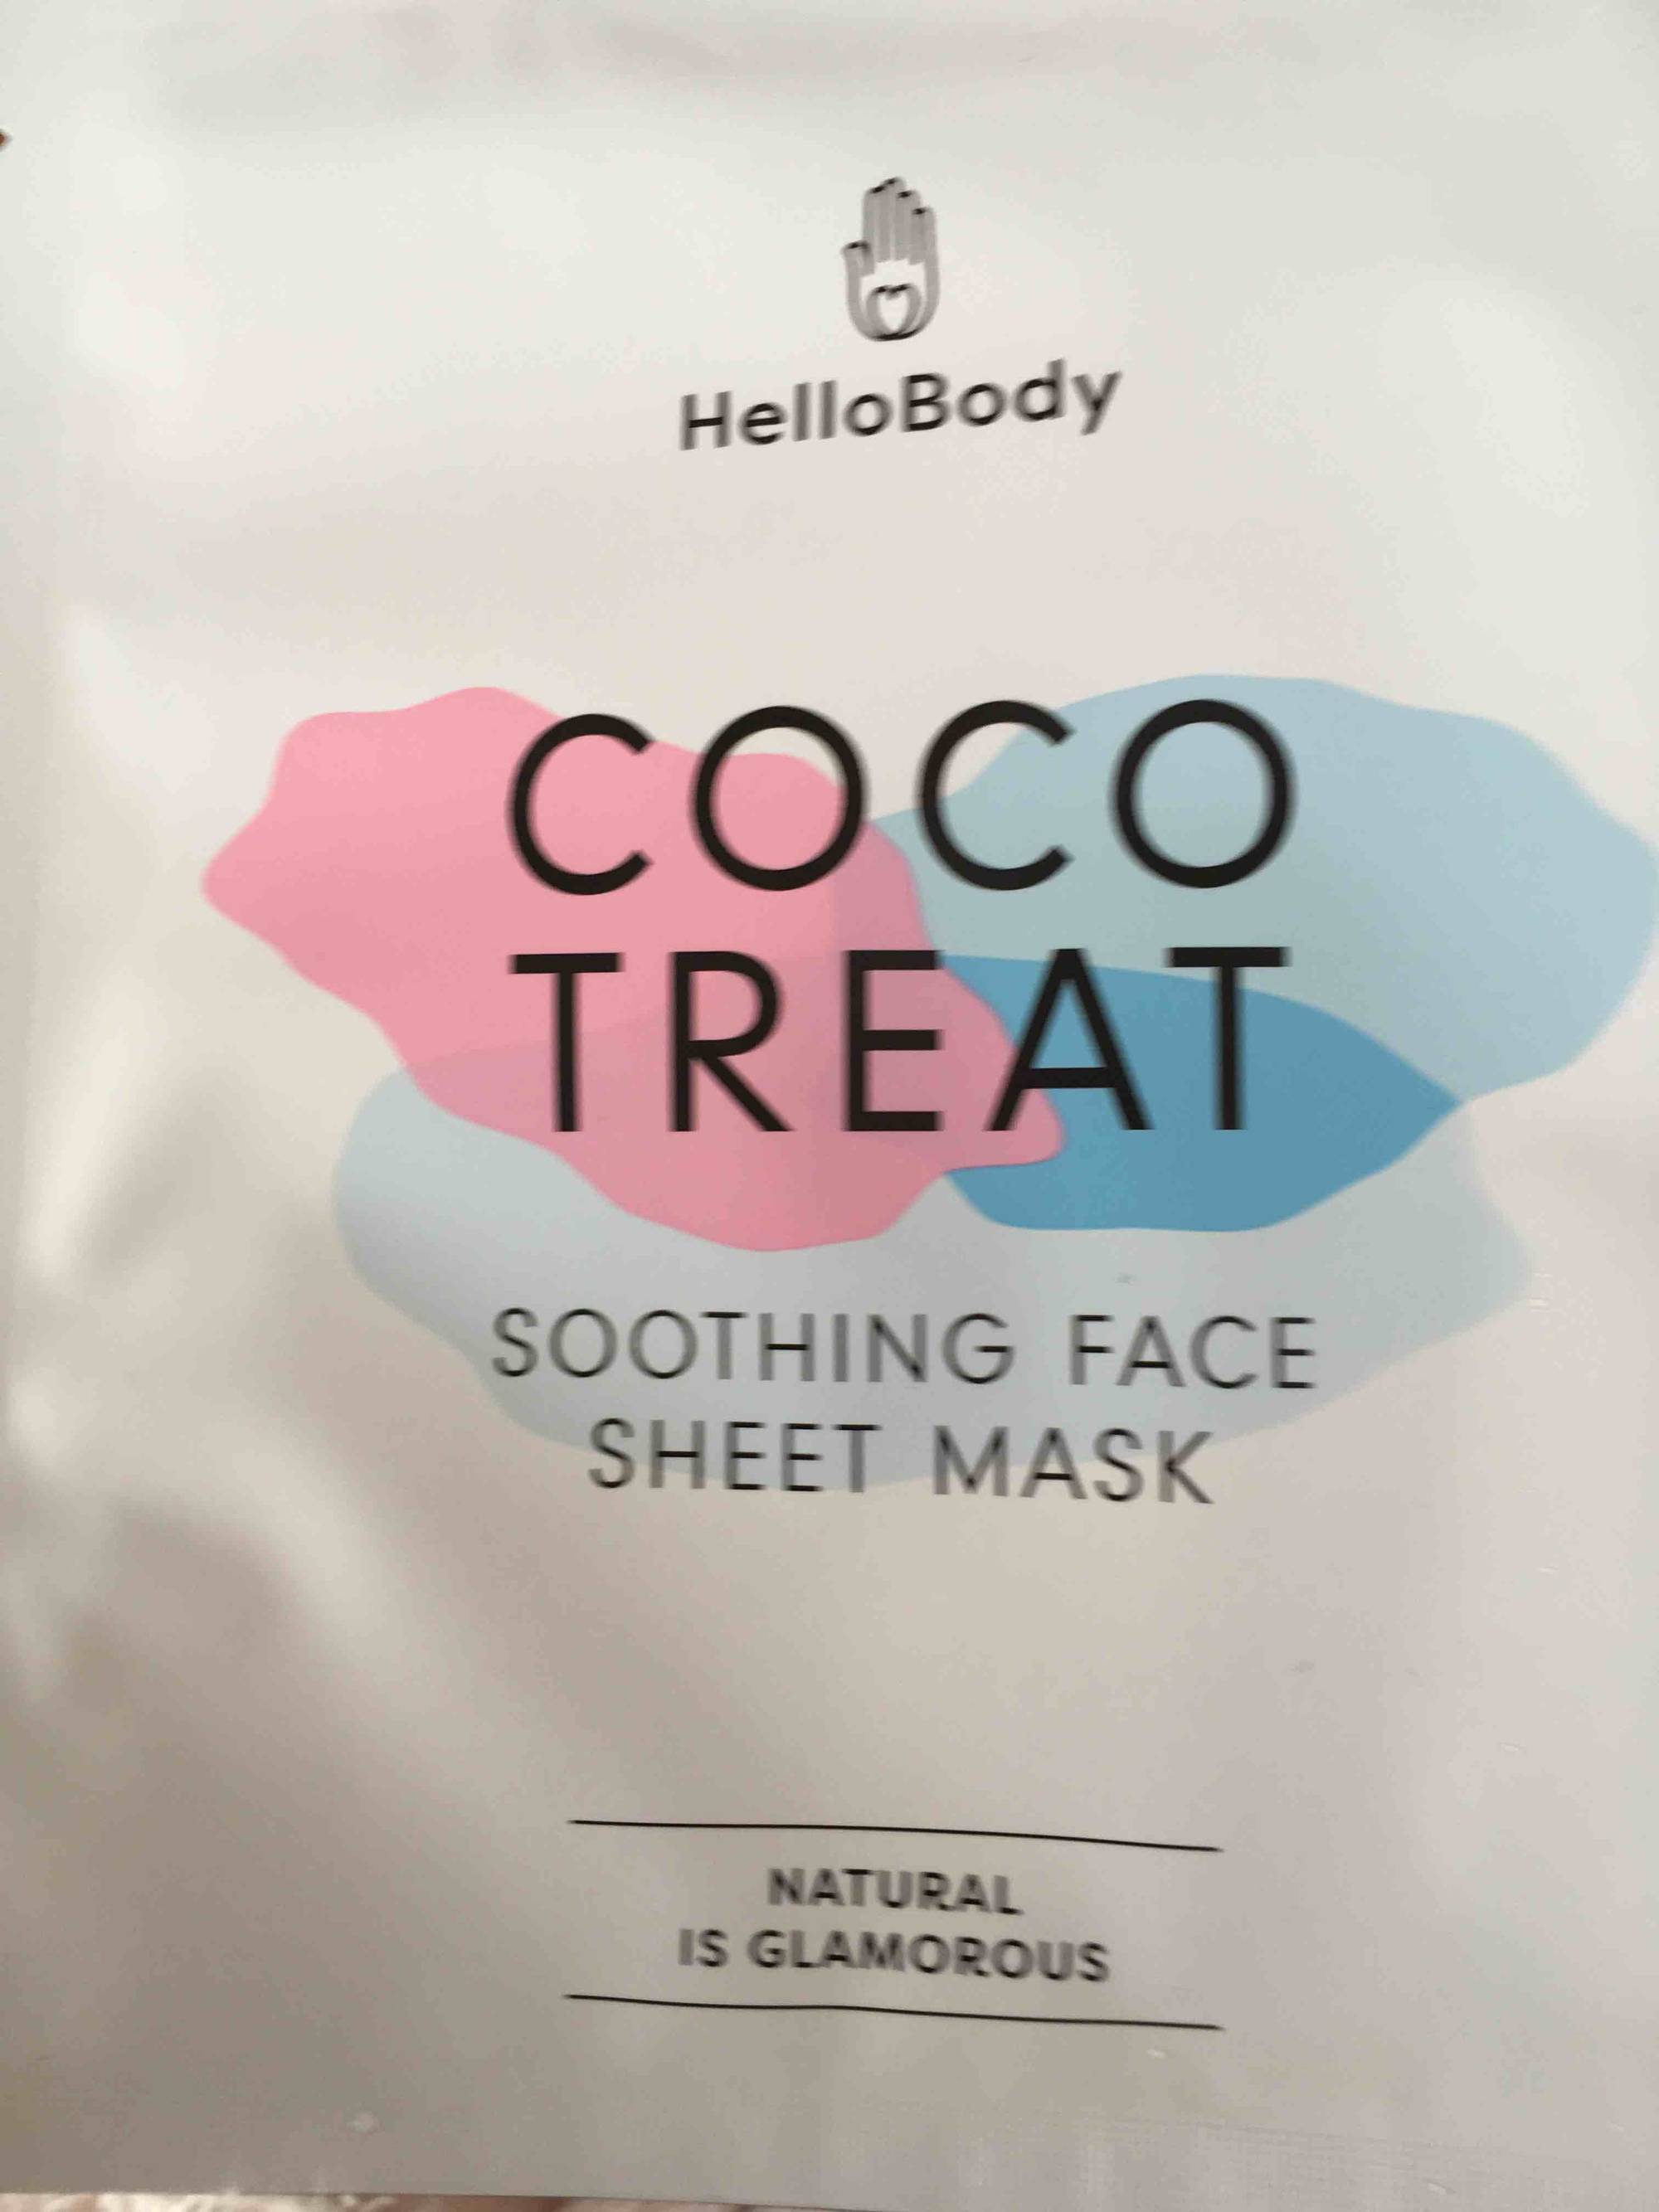 HELLOBODY - Coco treat - Soothing face sheet mask